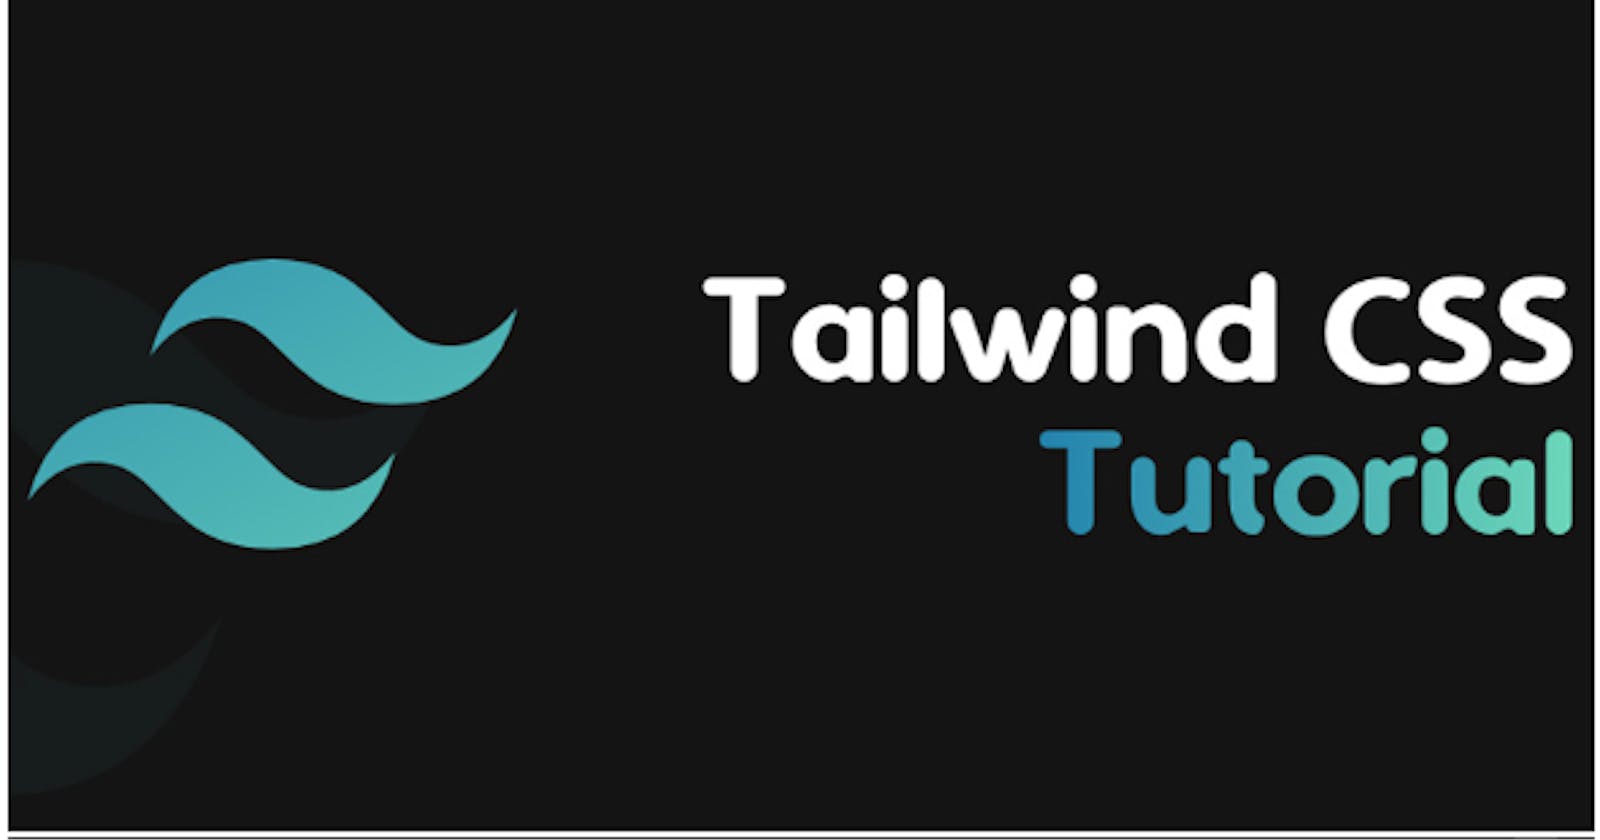 Getting Started with Tailwind CSS: A Beginner’s Guide